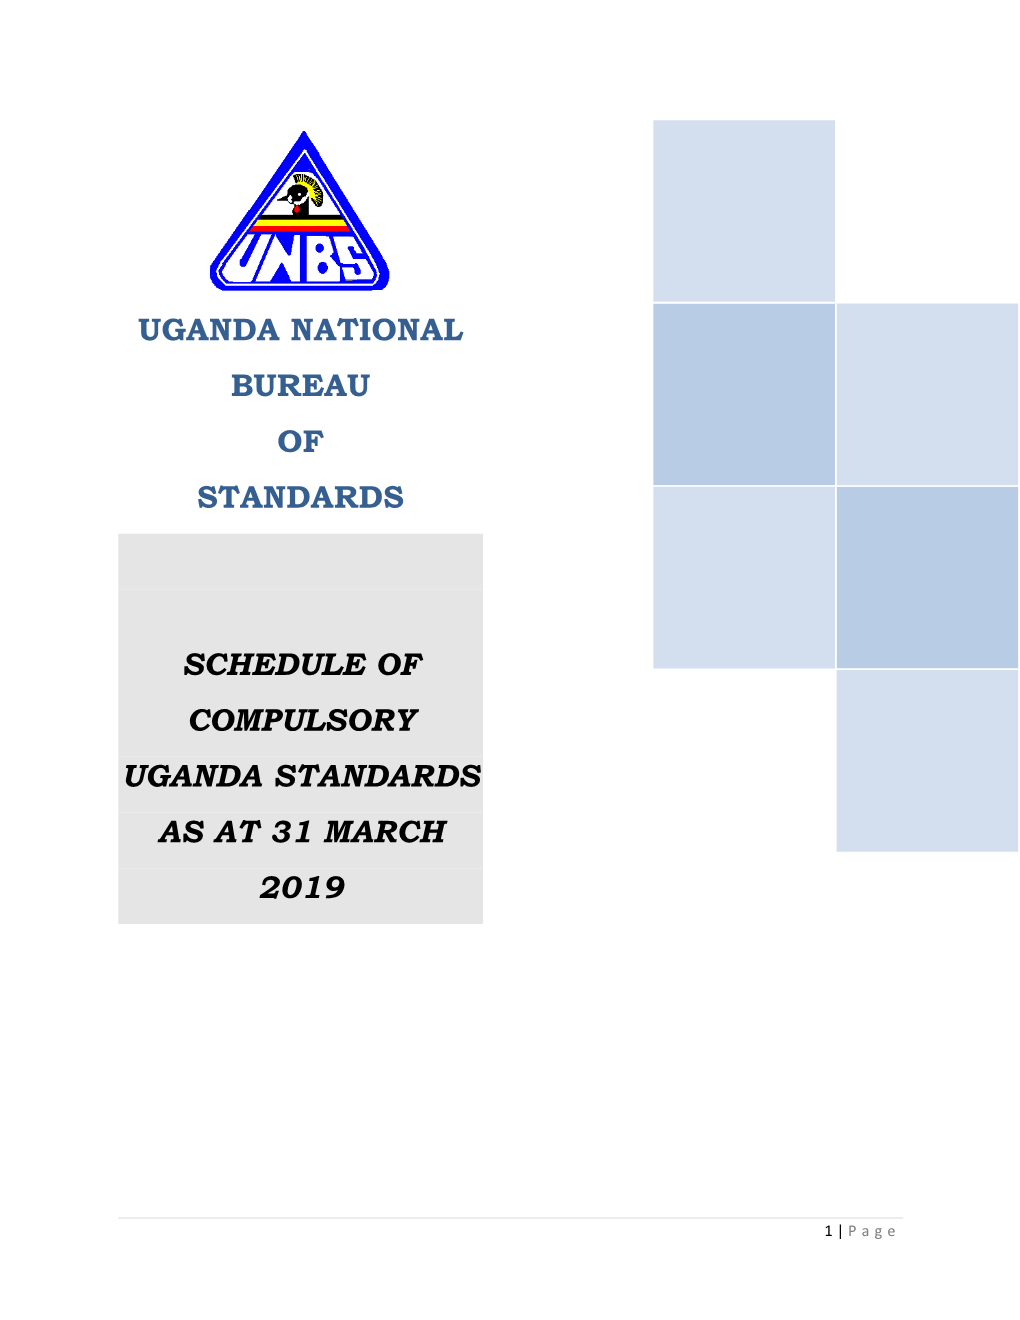 Schedule of Compulsory Uganda Standards As at 31 March 2019